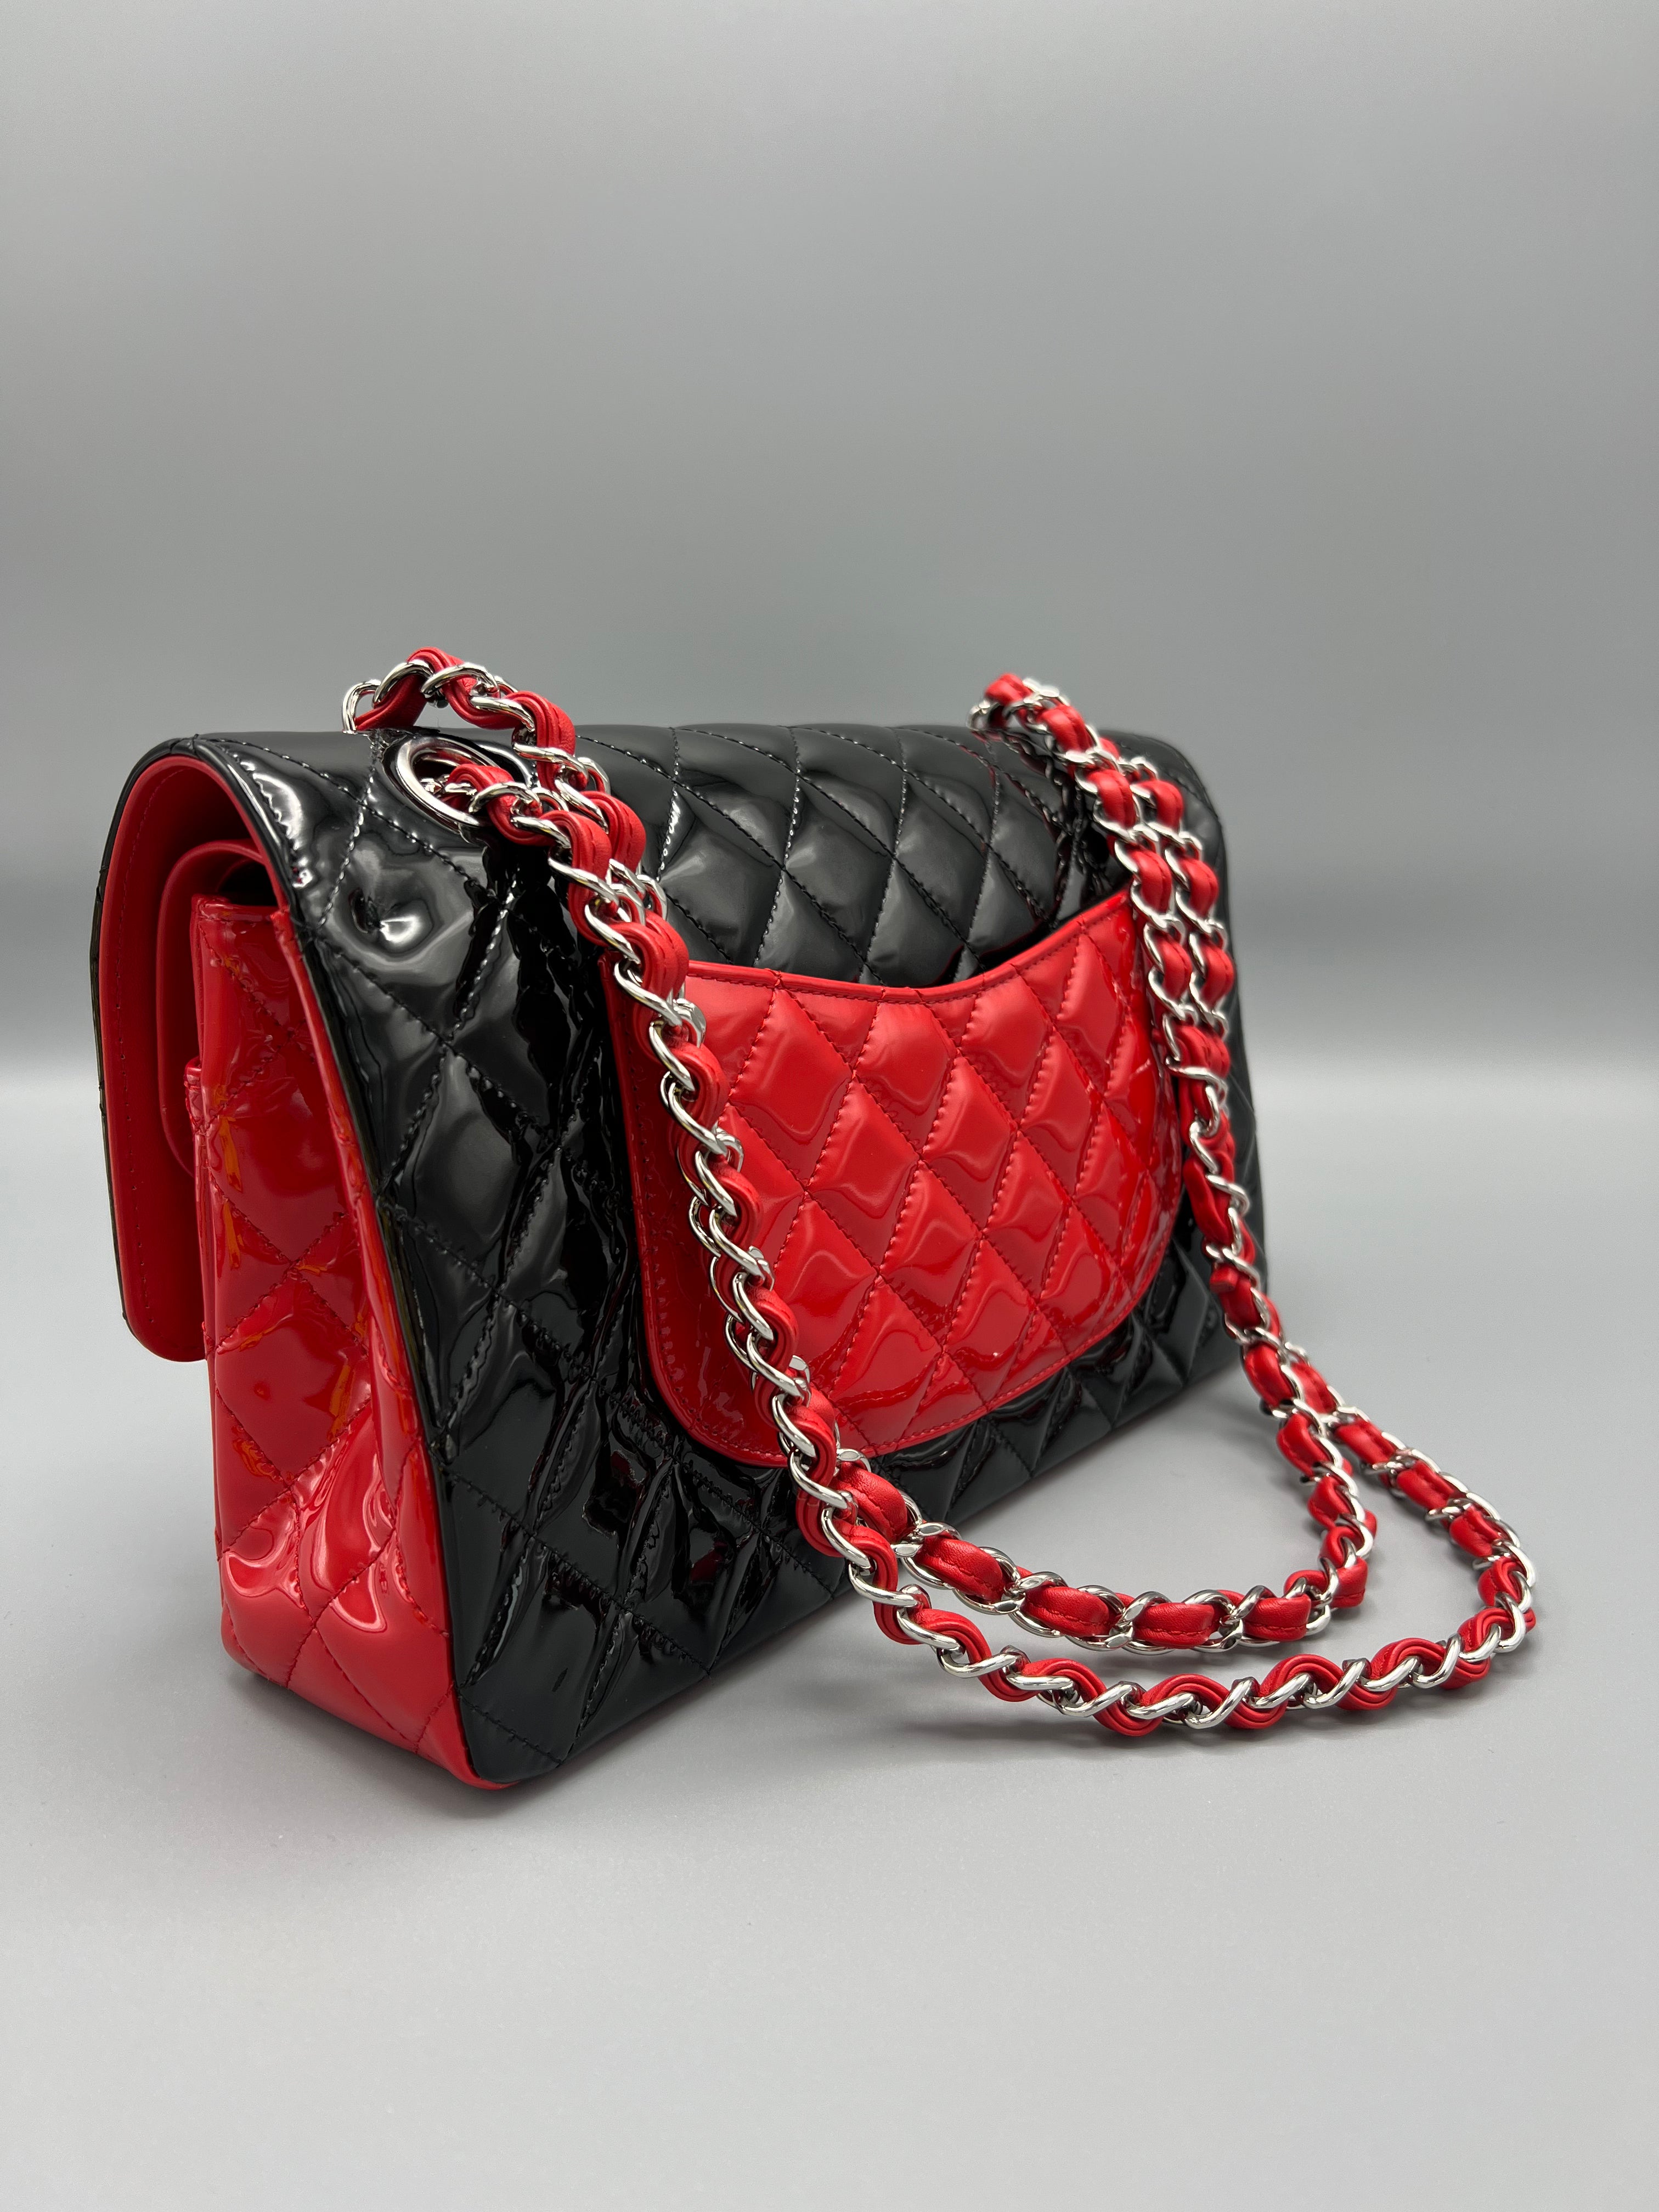 Pre-loved Black and Red Patent Chanel Medium Classic Flap Bag